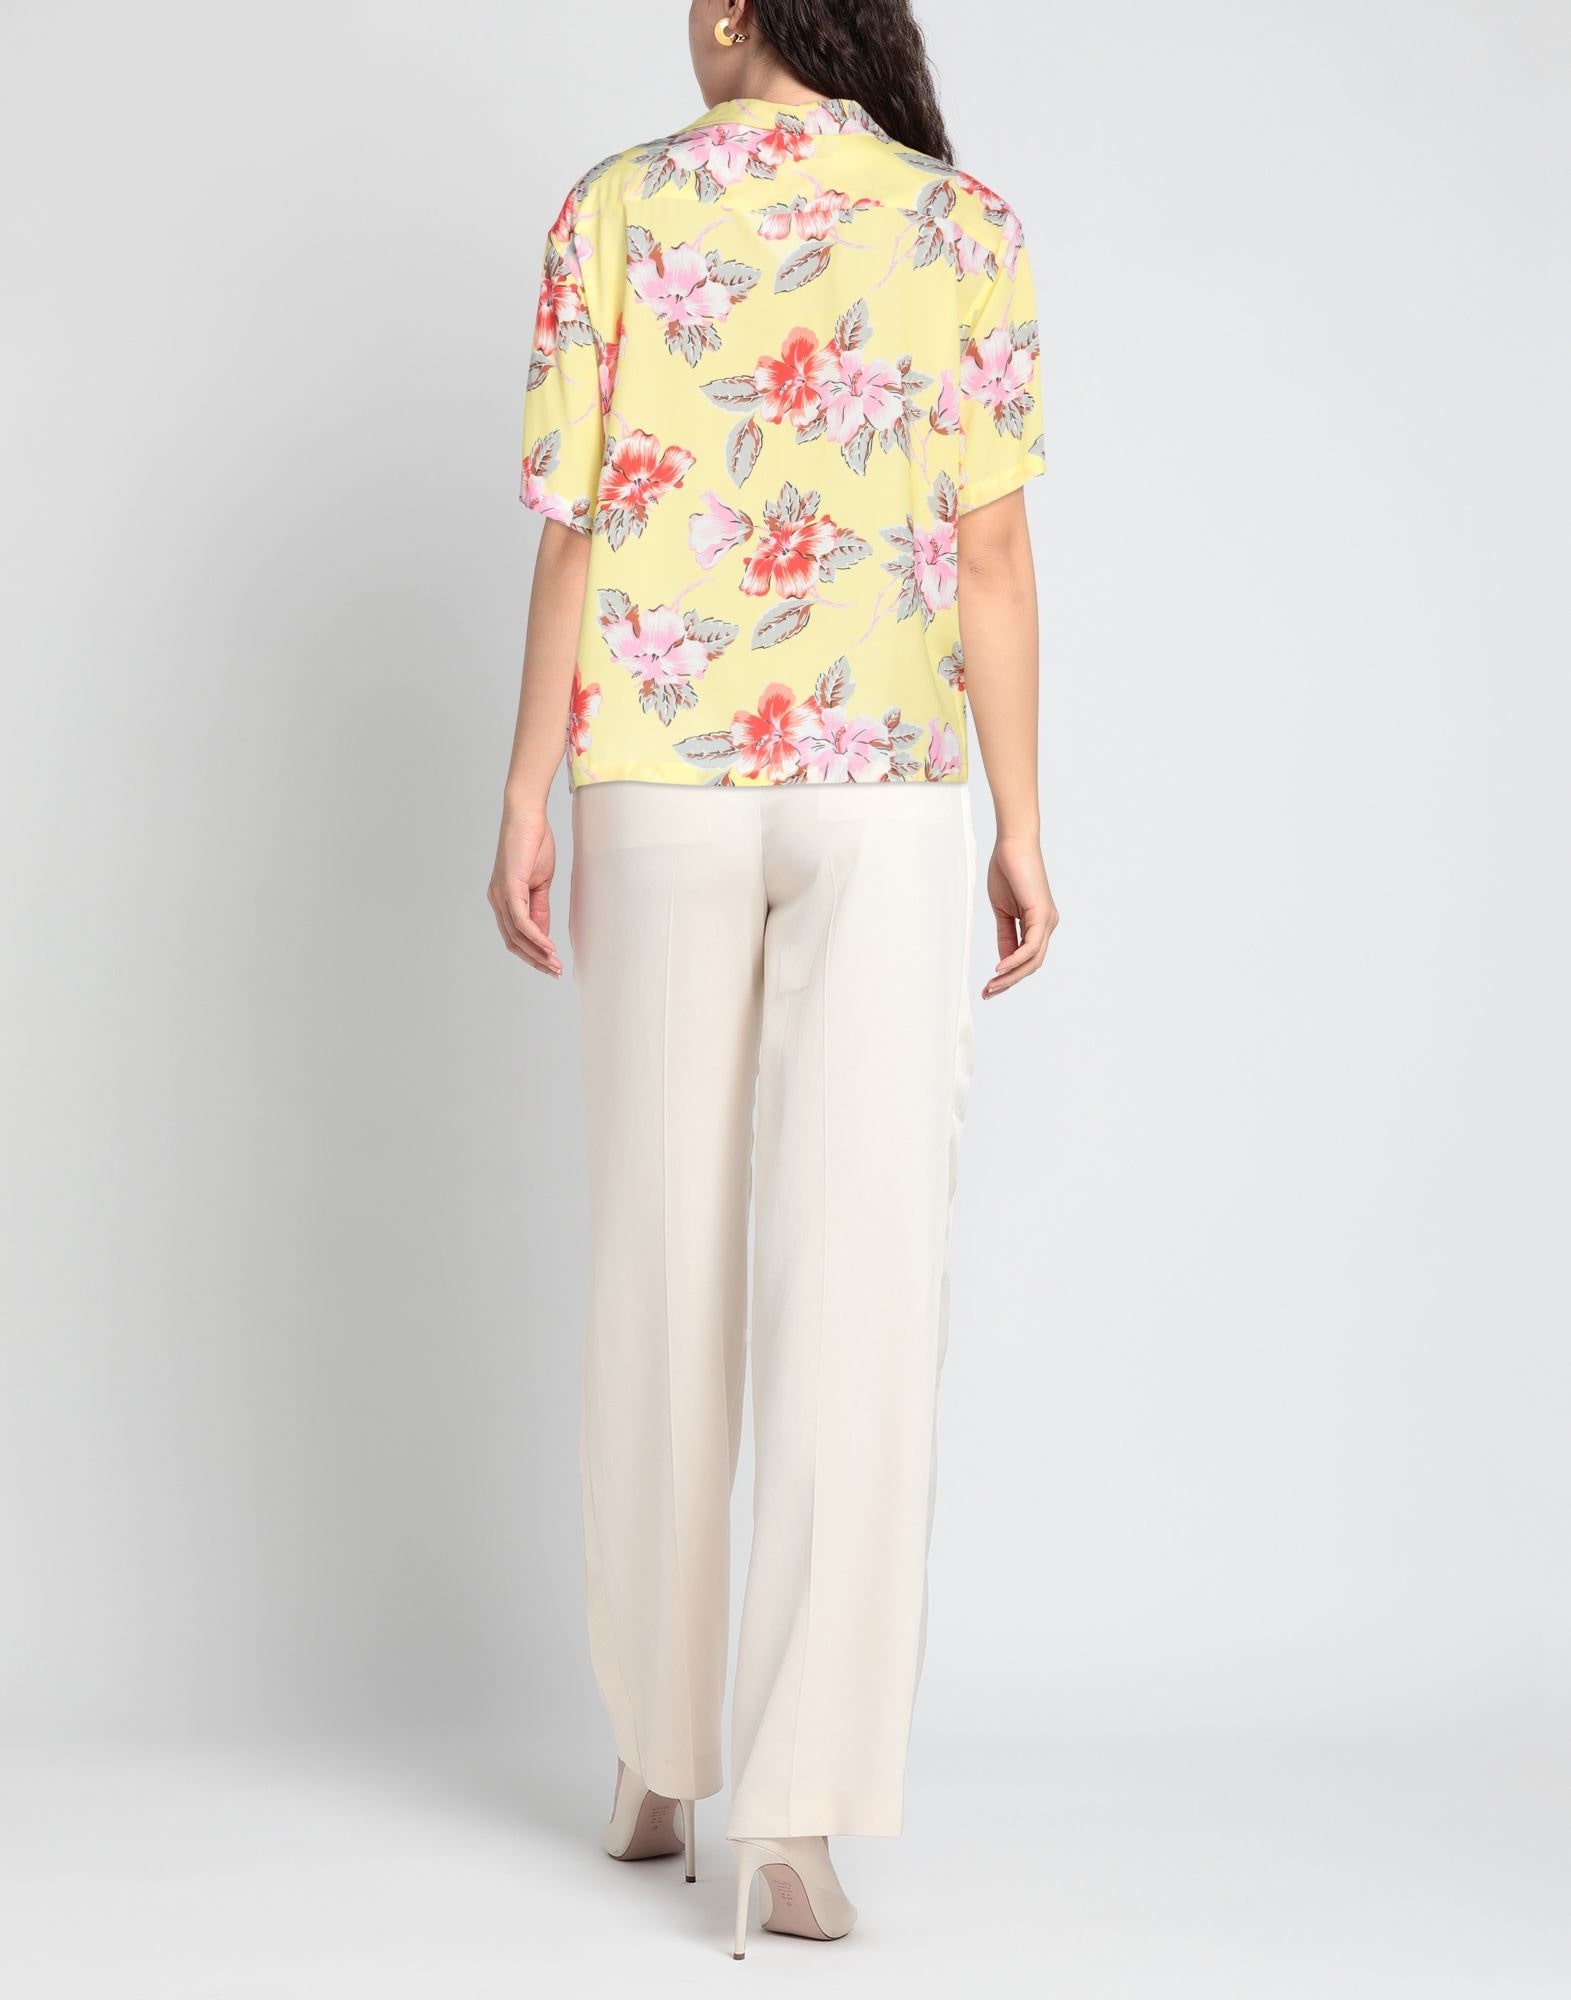 Yellow Women's Floral Shirts & Blouses - 3